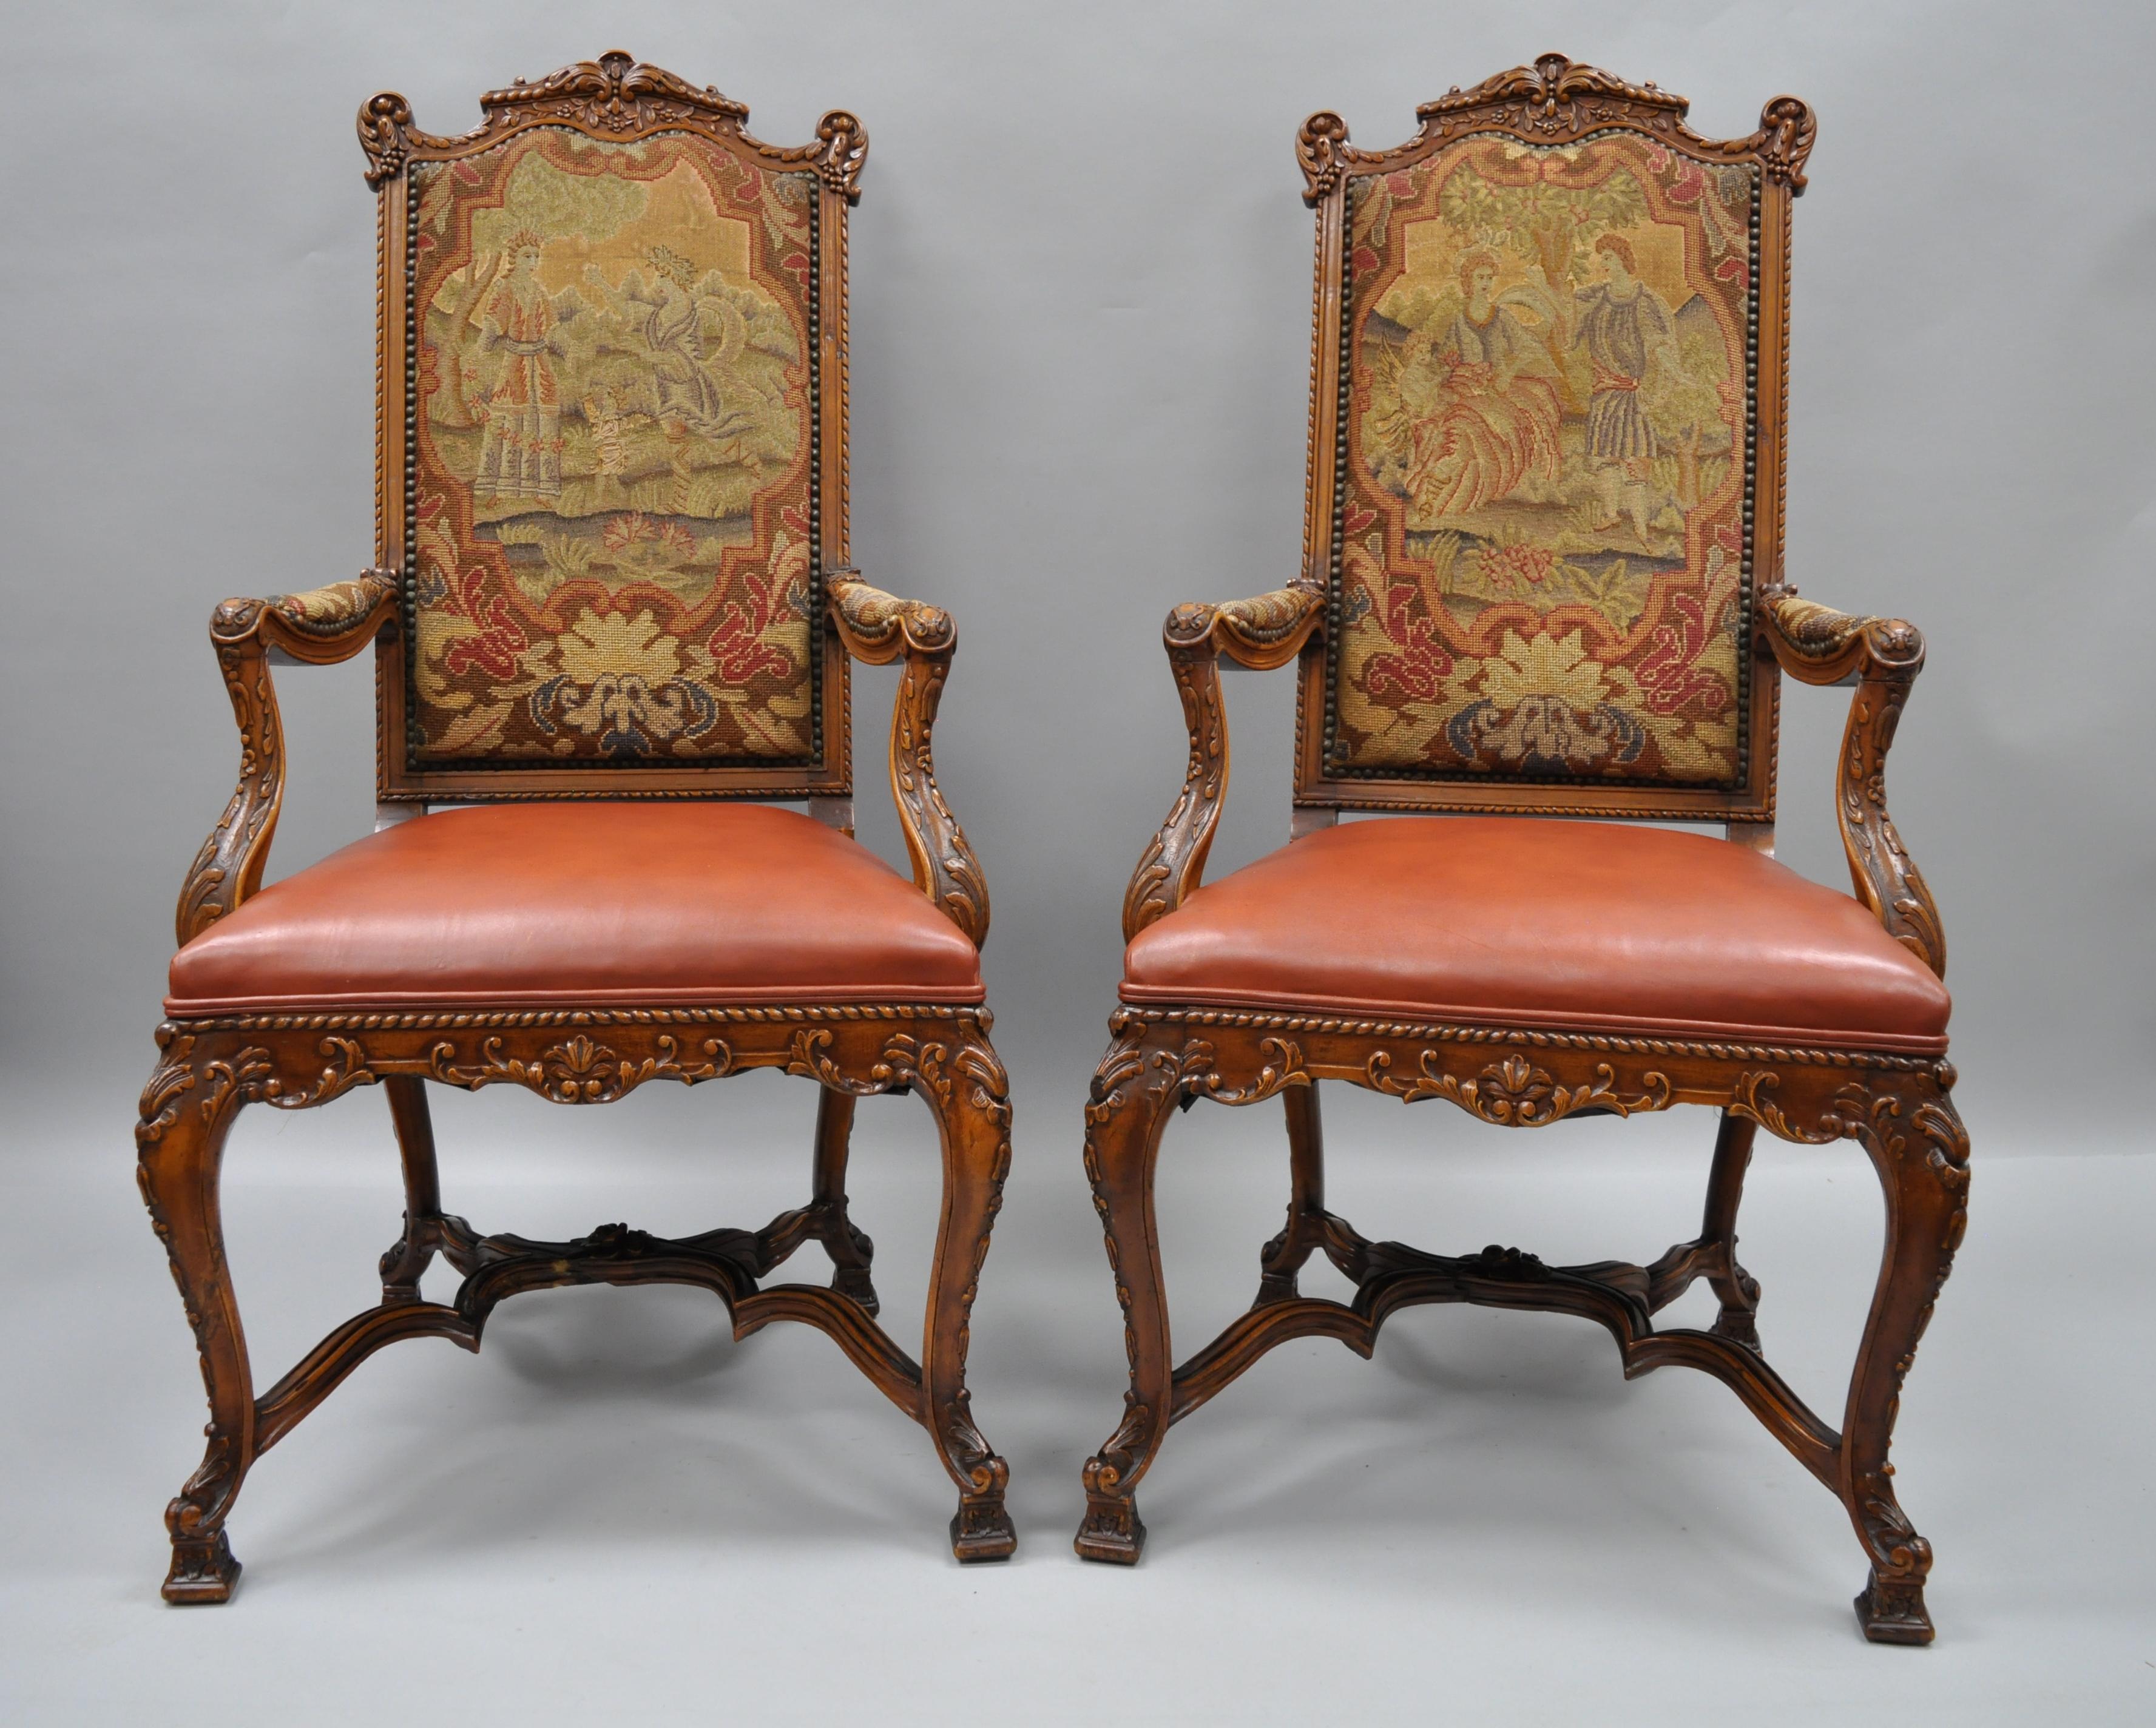 Set of eight Rococo style carved walnut, leather, and needlepoint dining chairs, circa 1900. Set includes two armchairs with figural needlepoint upholstered backs and armrests and leather upholstered seats. The six side chairs having leather